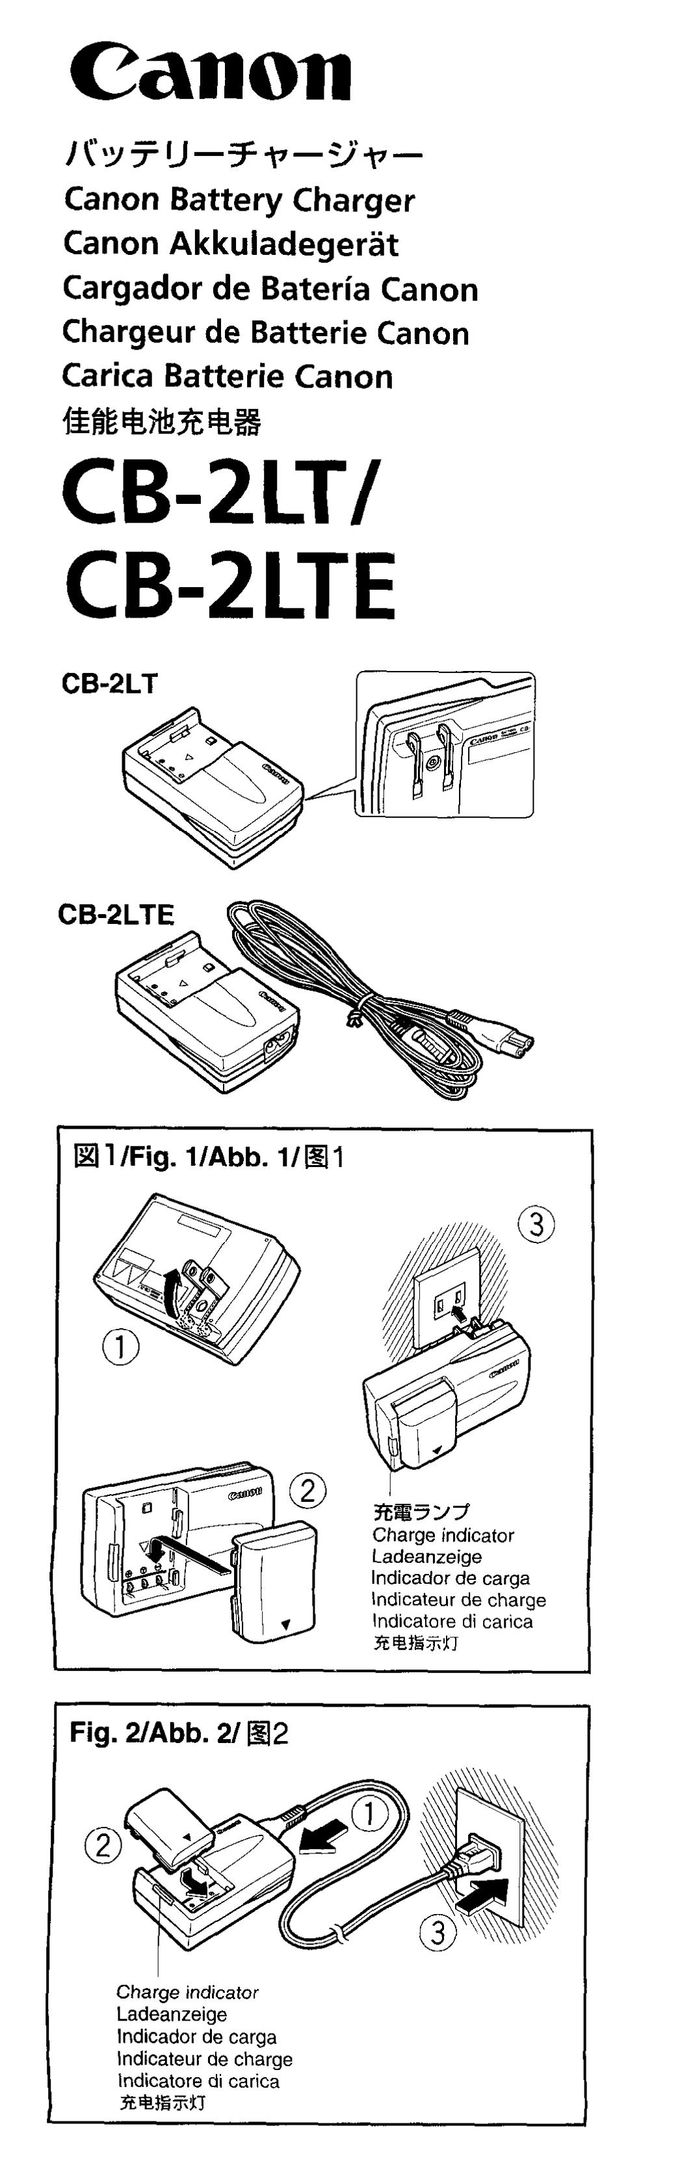 Canon CB-2LT Battery Charger User Manual